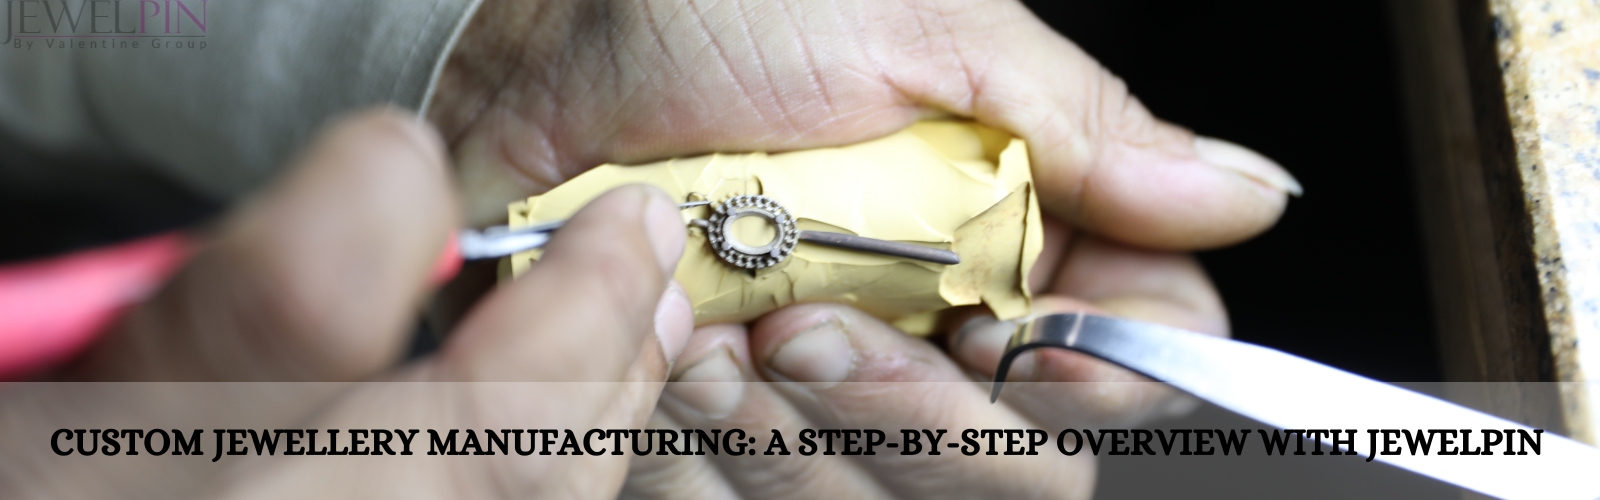 custom jewellery manufacturing a full guide to with jewelpin